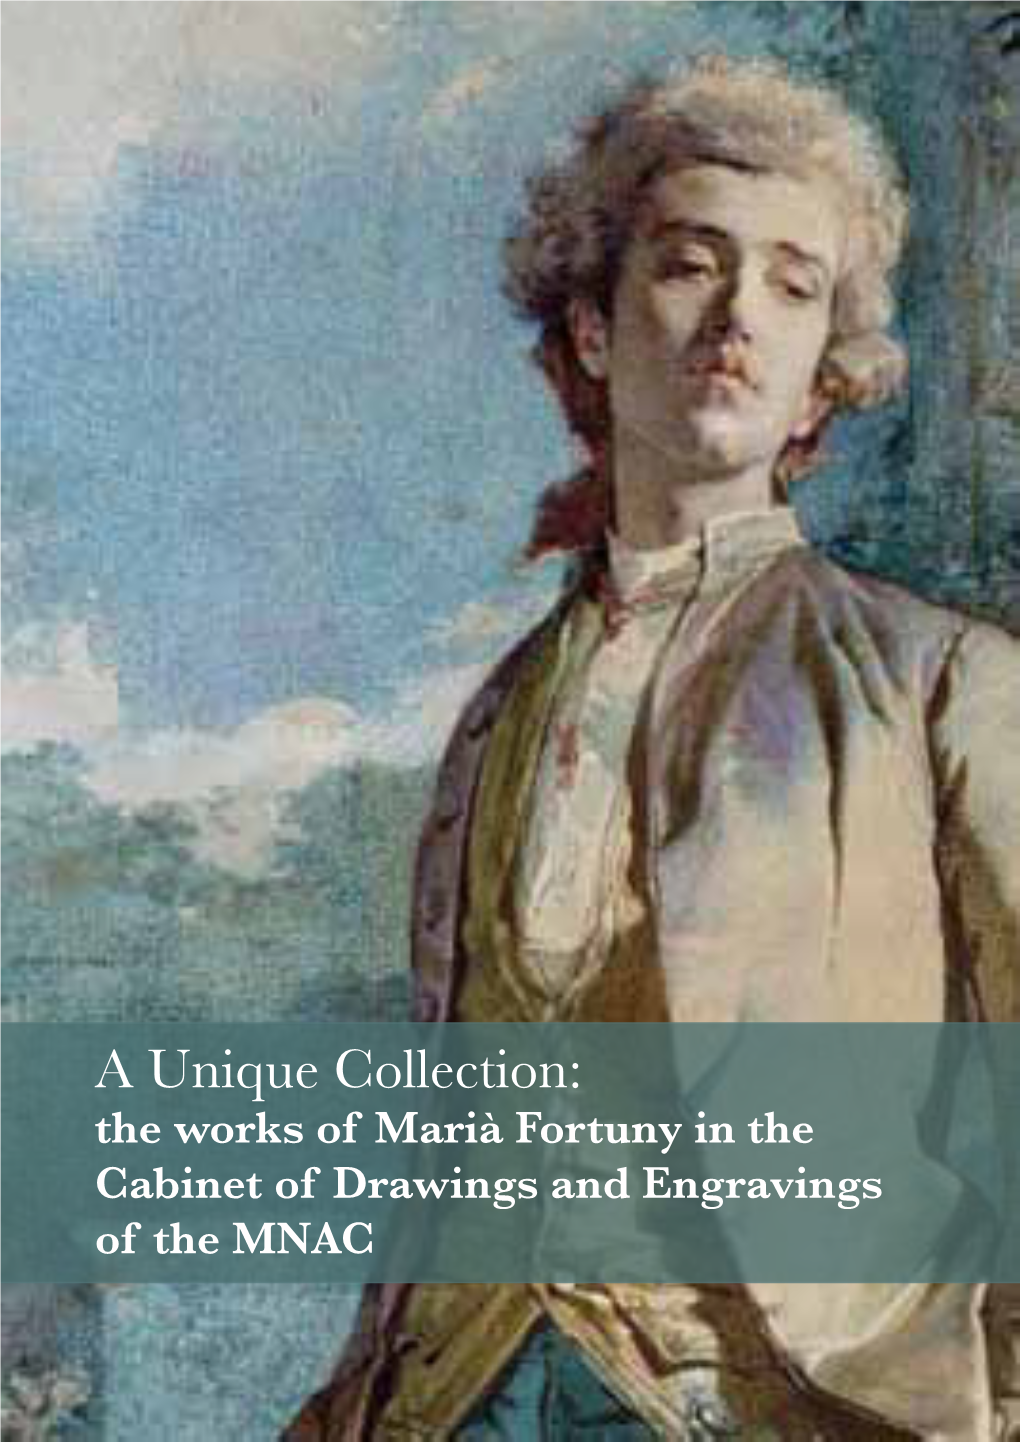 A Unique Collection: the Works of Marià Fortuny in the Cabinet of Drawings and Engravings of the MNAC